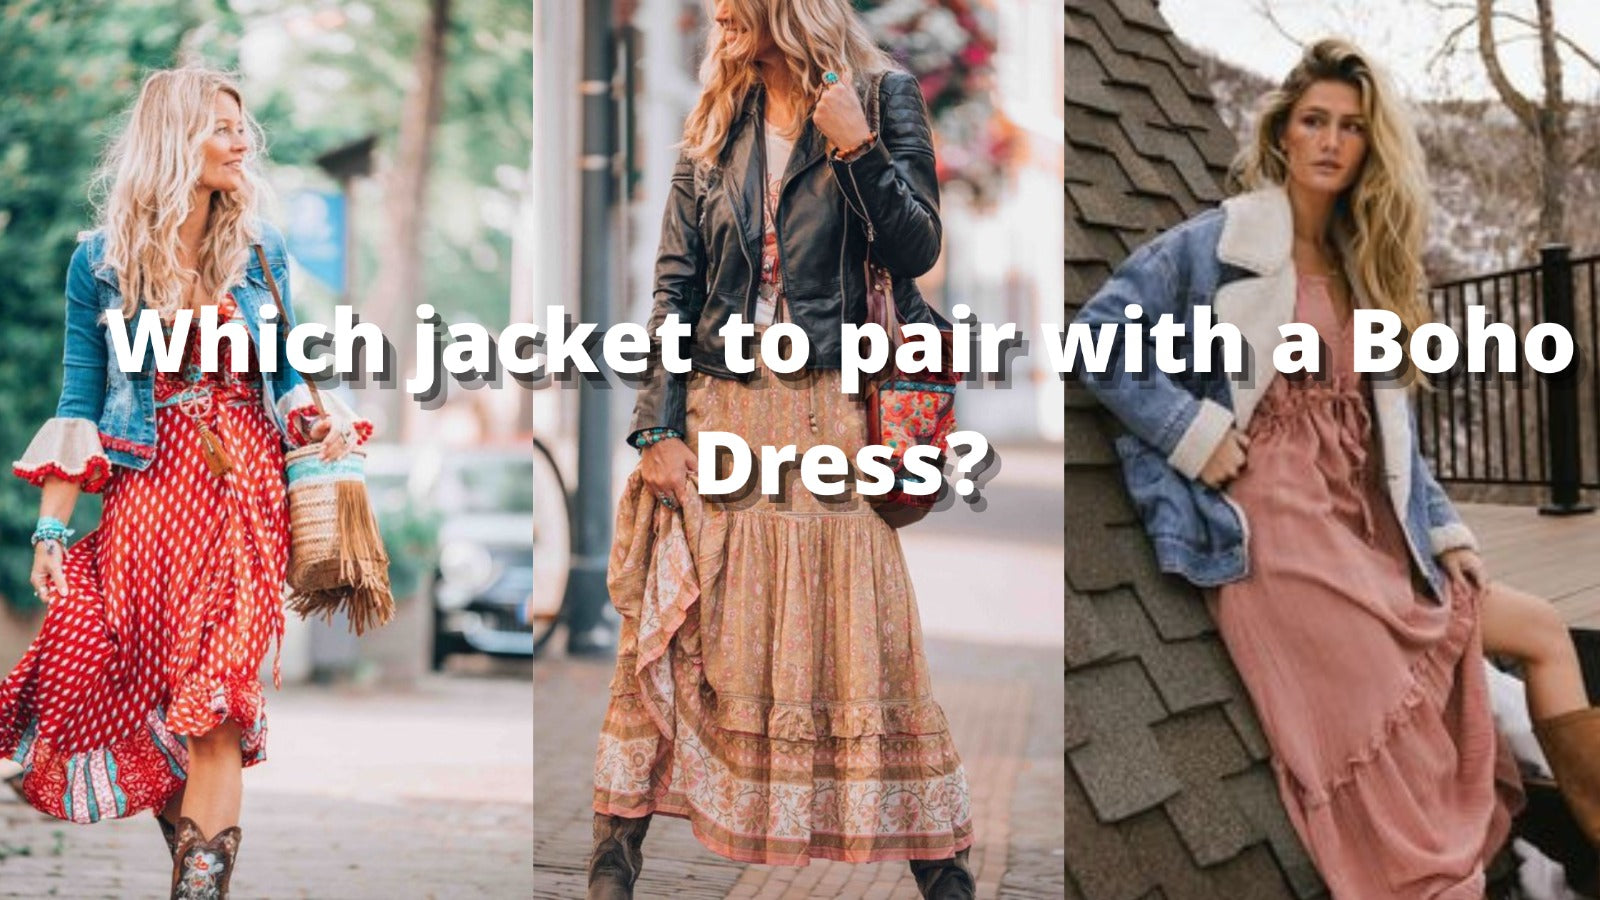 Which Jacket to pair with a Boho Dress?